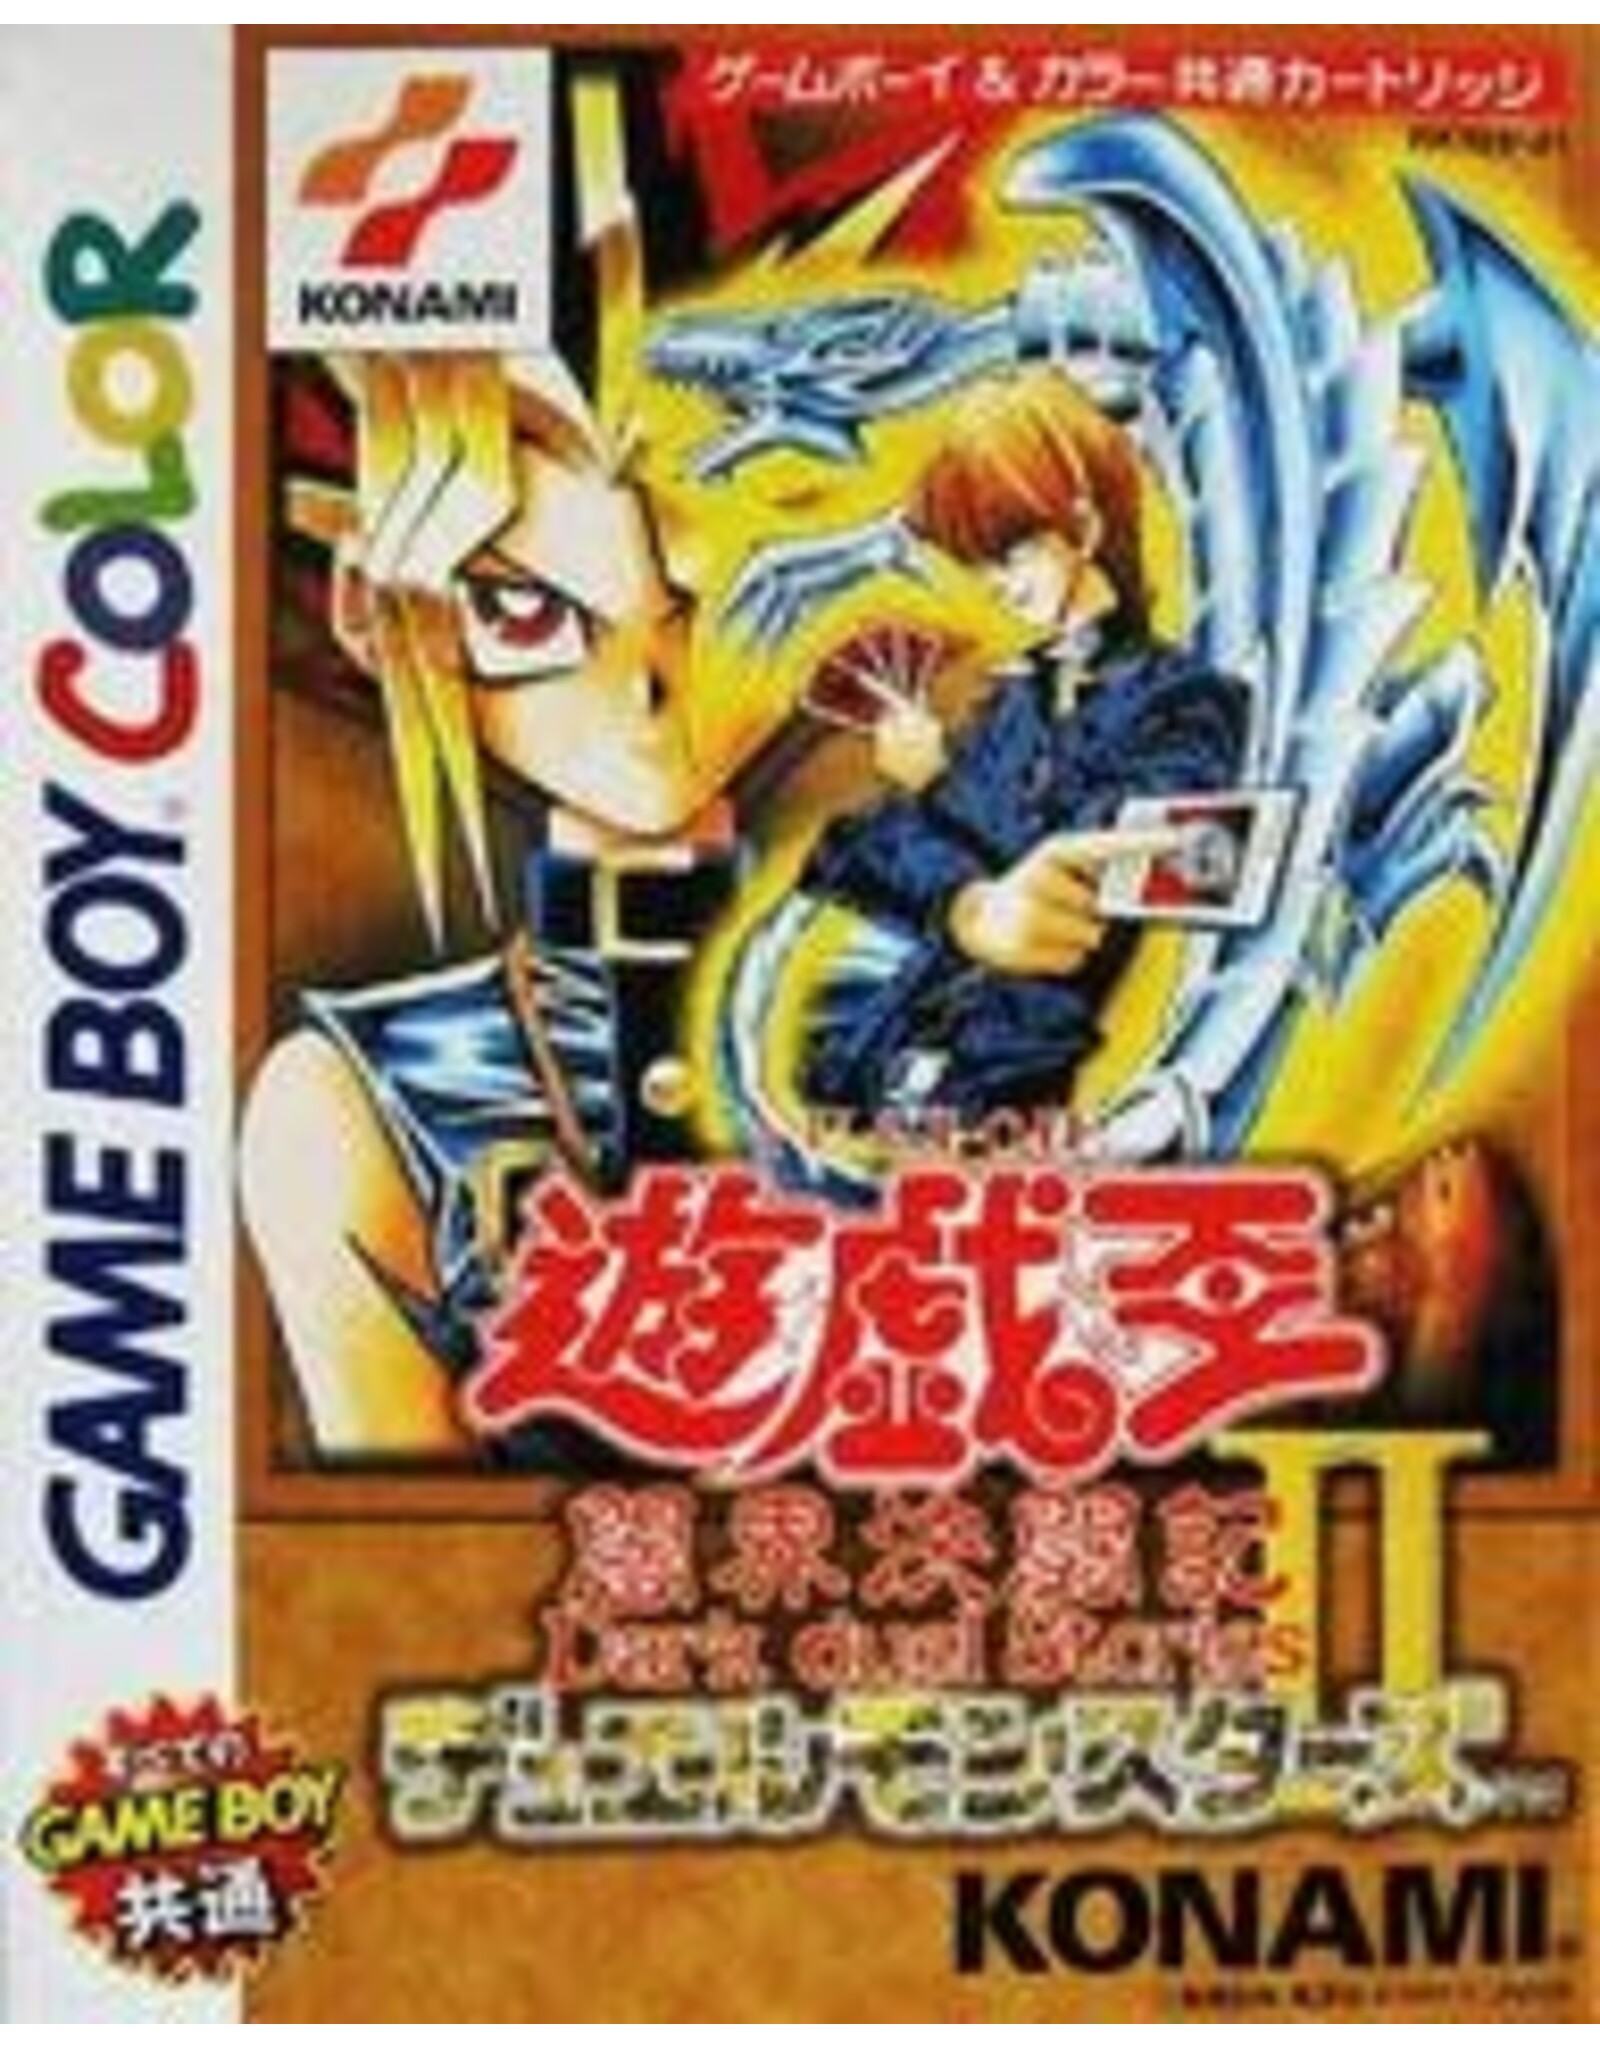 Game Boy Color Yu-Gi-Oh! Duel Monsters II: Dark Duel Stories (Cart Only, JP Import)